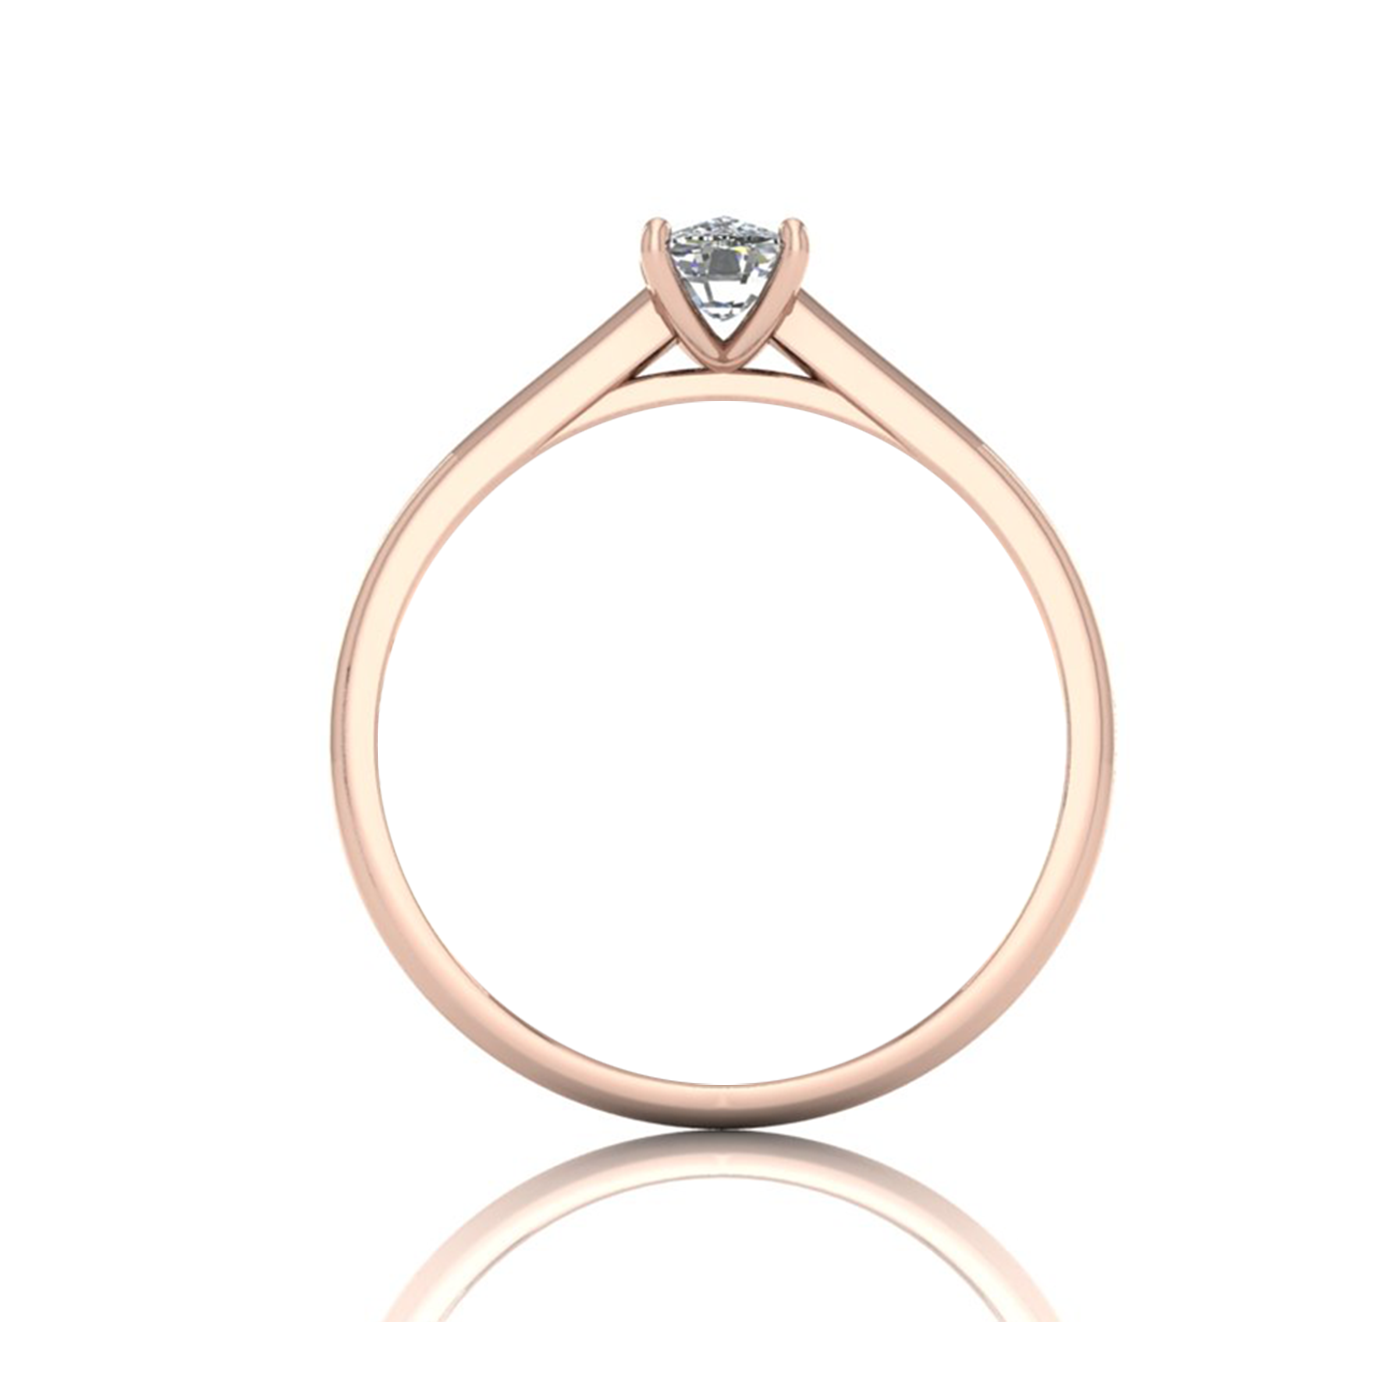 18k rose gold 0,80 ct 4 prongs solitaire elongated cushion cut diamond engagement ring with whisper thin band